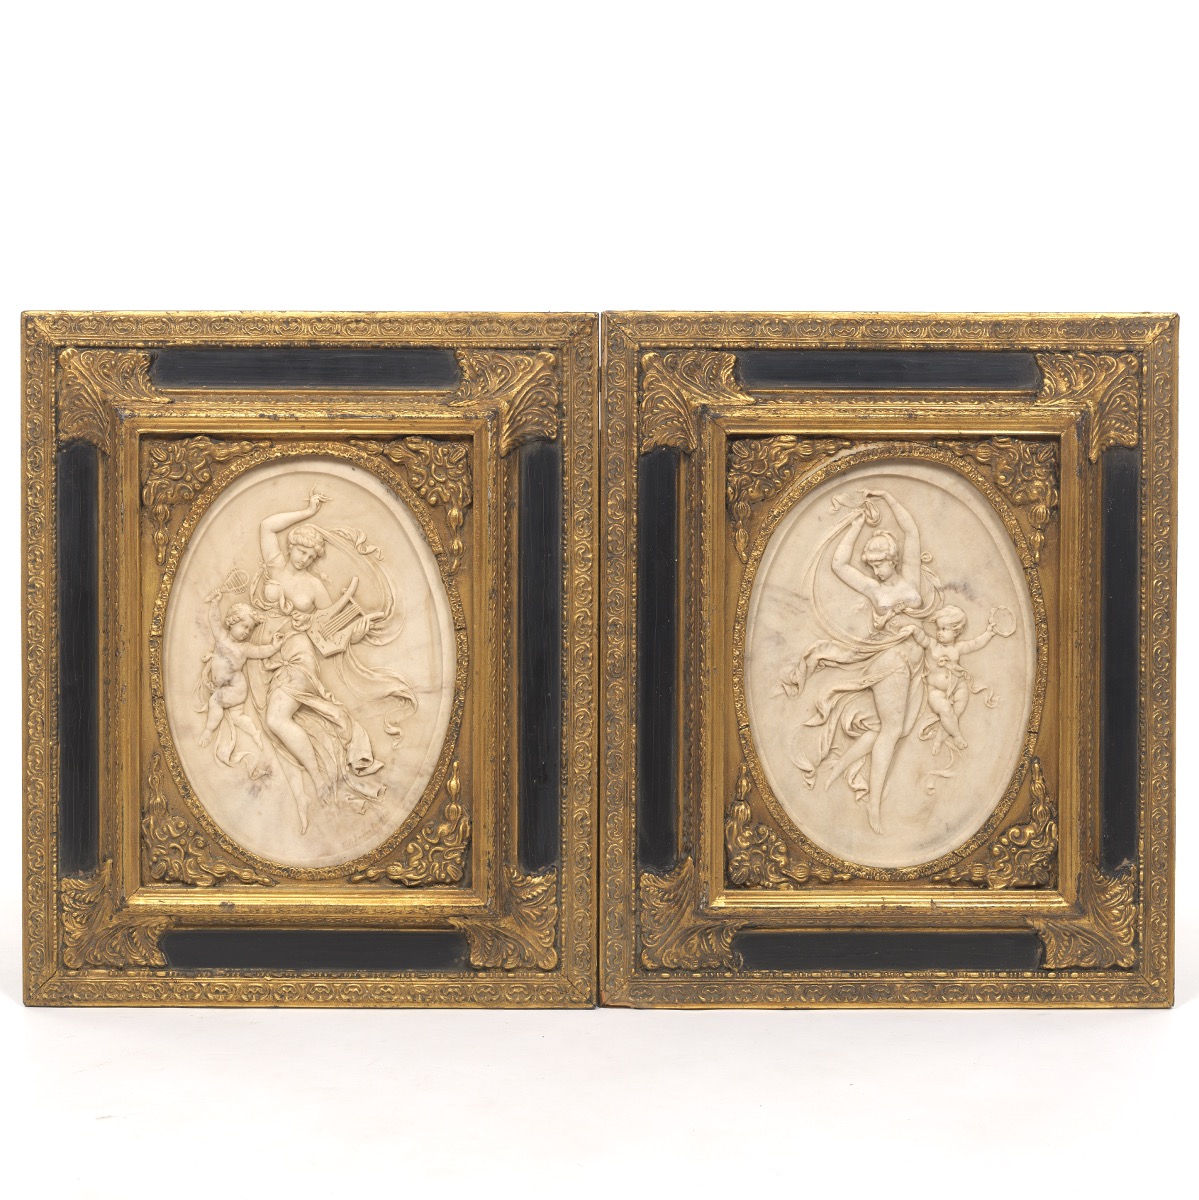 Two French Stone Cameo Oval Plaques in Fancy Frames, T.P. Danbiene Paris 1889